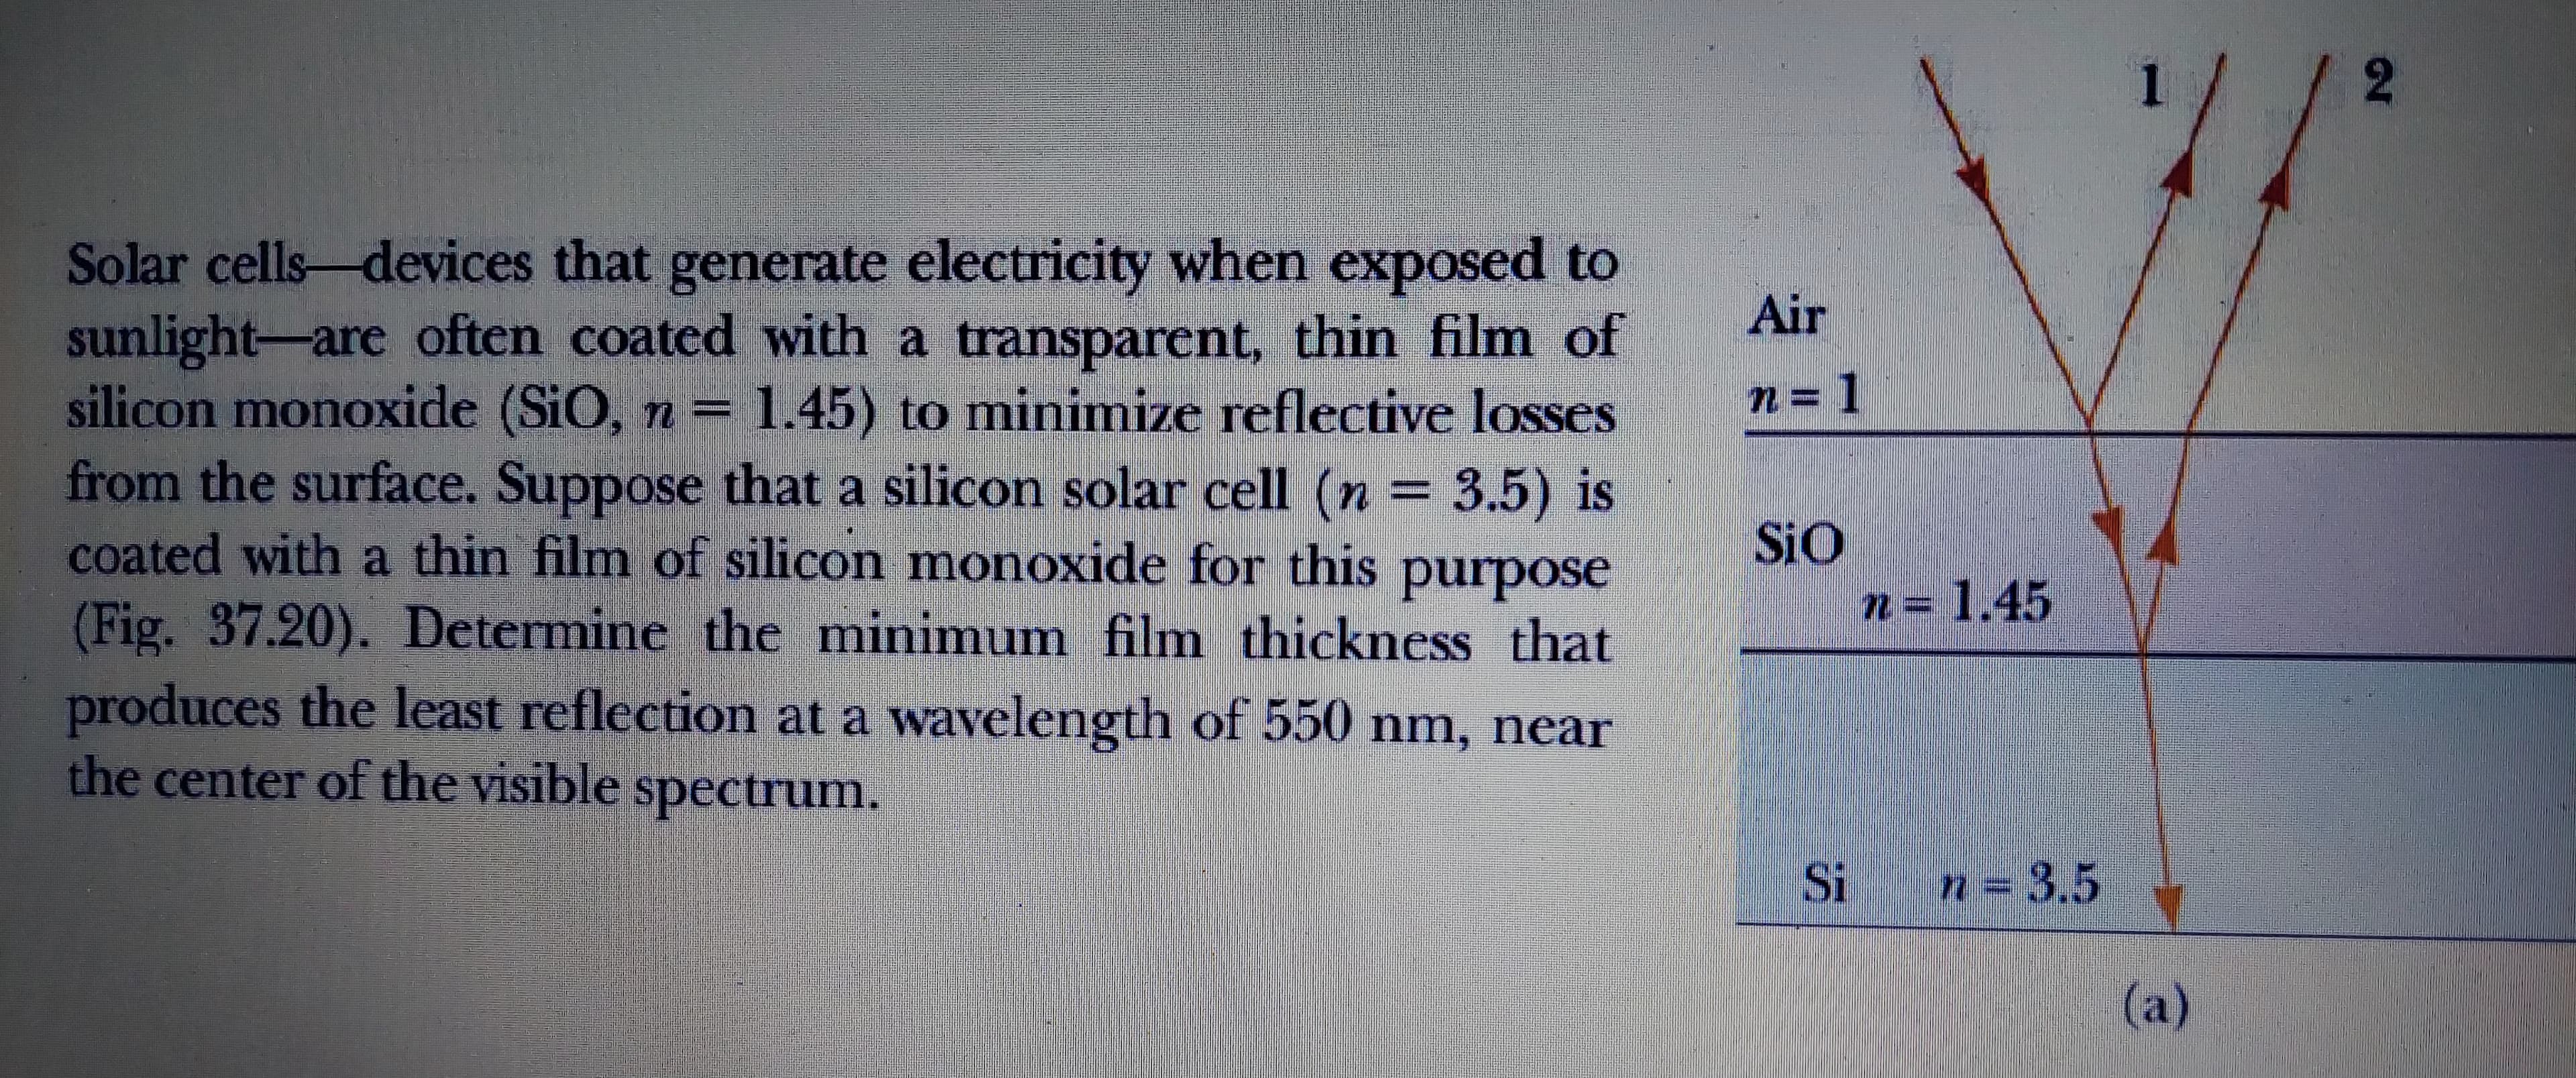 Solar cells-devices that generate electricity when exposed to
sunlight-are often coated with a transparent, thin film of
silicon monoxide (SiO, n = 1.45) to minimize reflective losses
from the surface. Suppose that a silicon solar cell (n = 3.5) is
coated with a thin film of silicon monoxide for this purpose
(Fig. 37.20). Determine the minimum film thickness that
produces the least reflection at a wavelength of 550 nm, near
the center of the visible spectrum.
Air
n=1
SiO
Si
n = 1.45
n=3.5
1
7
(a)
/ 2